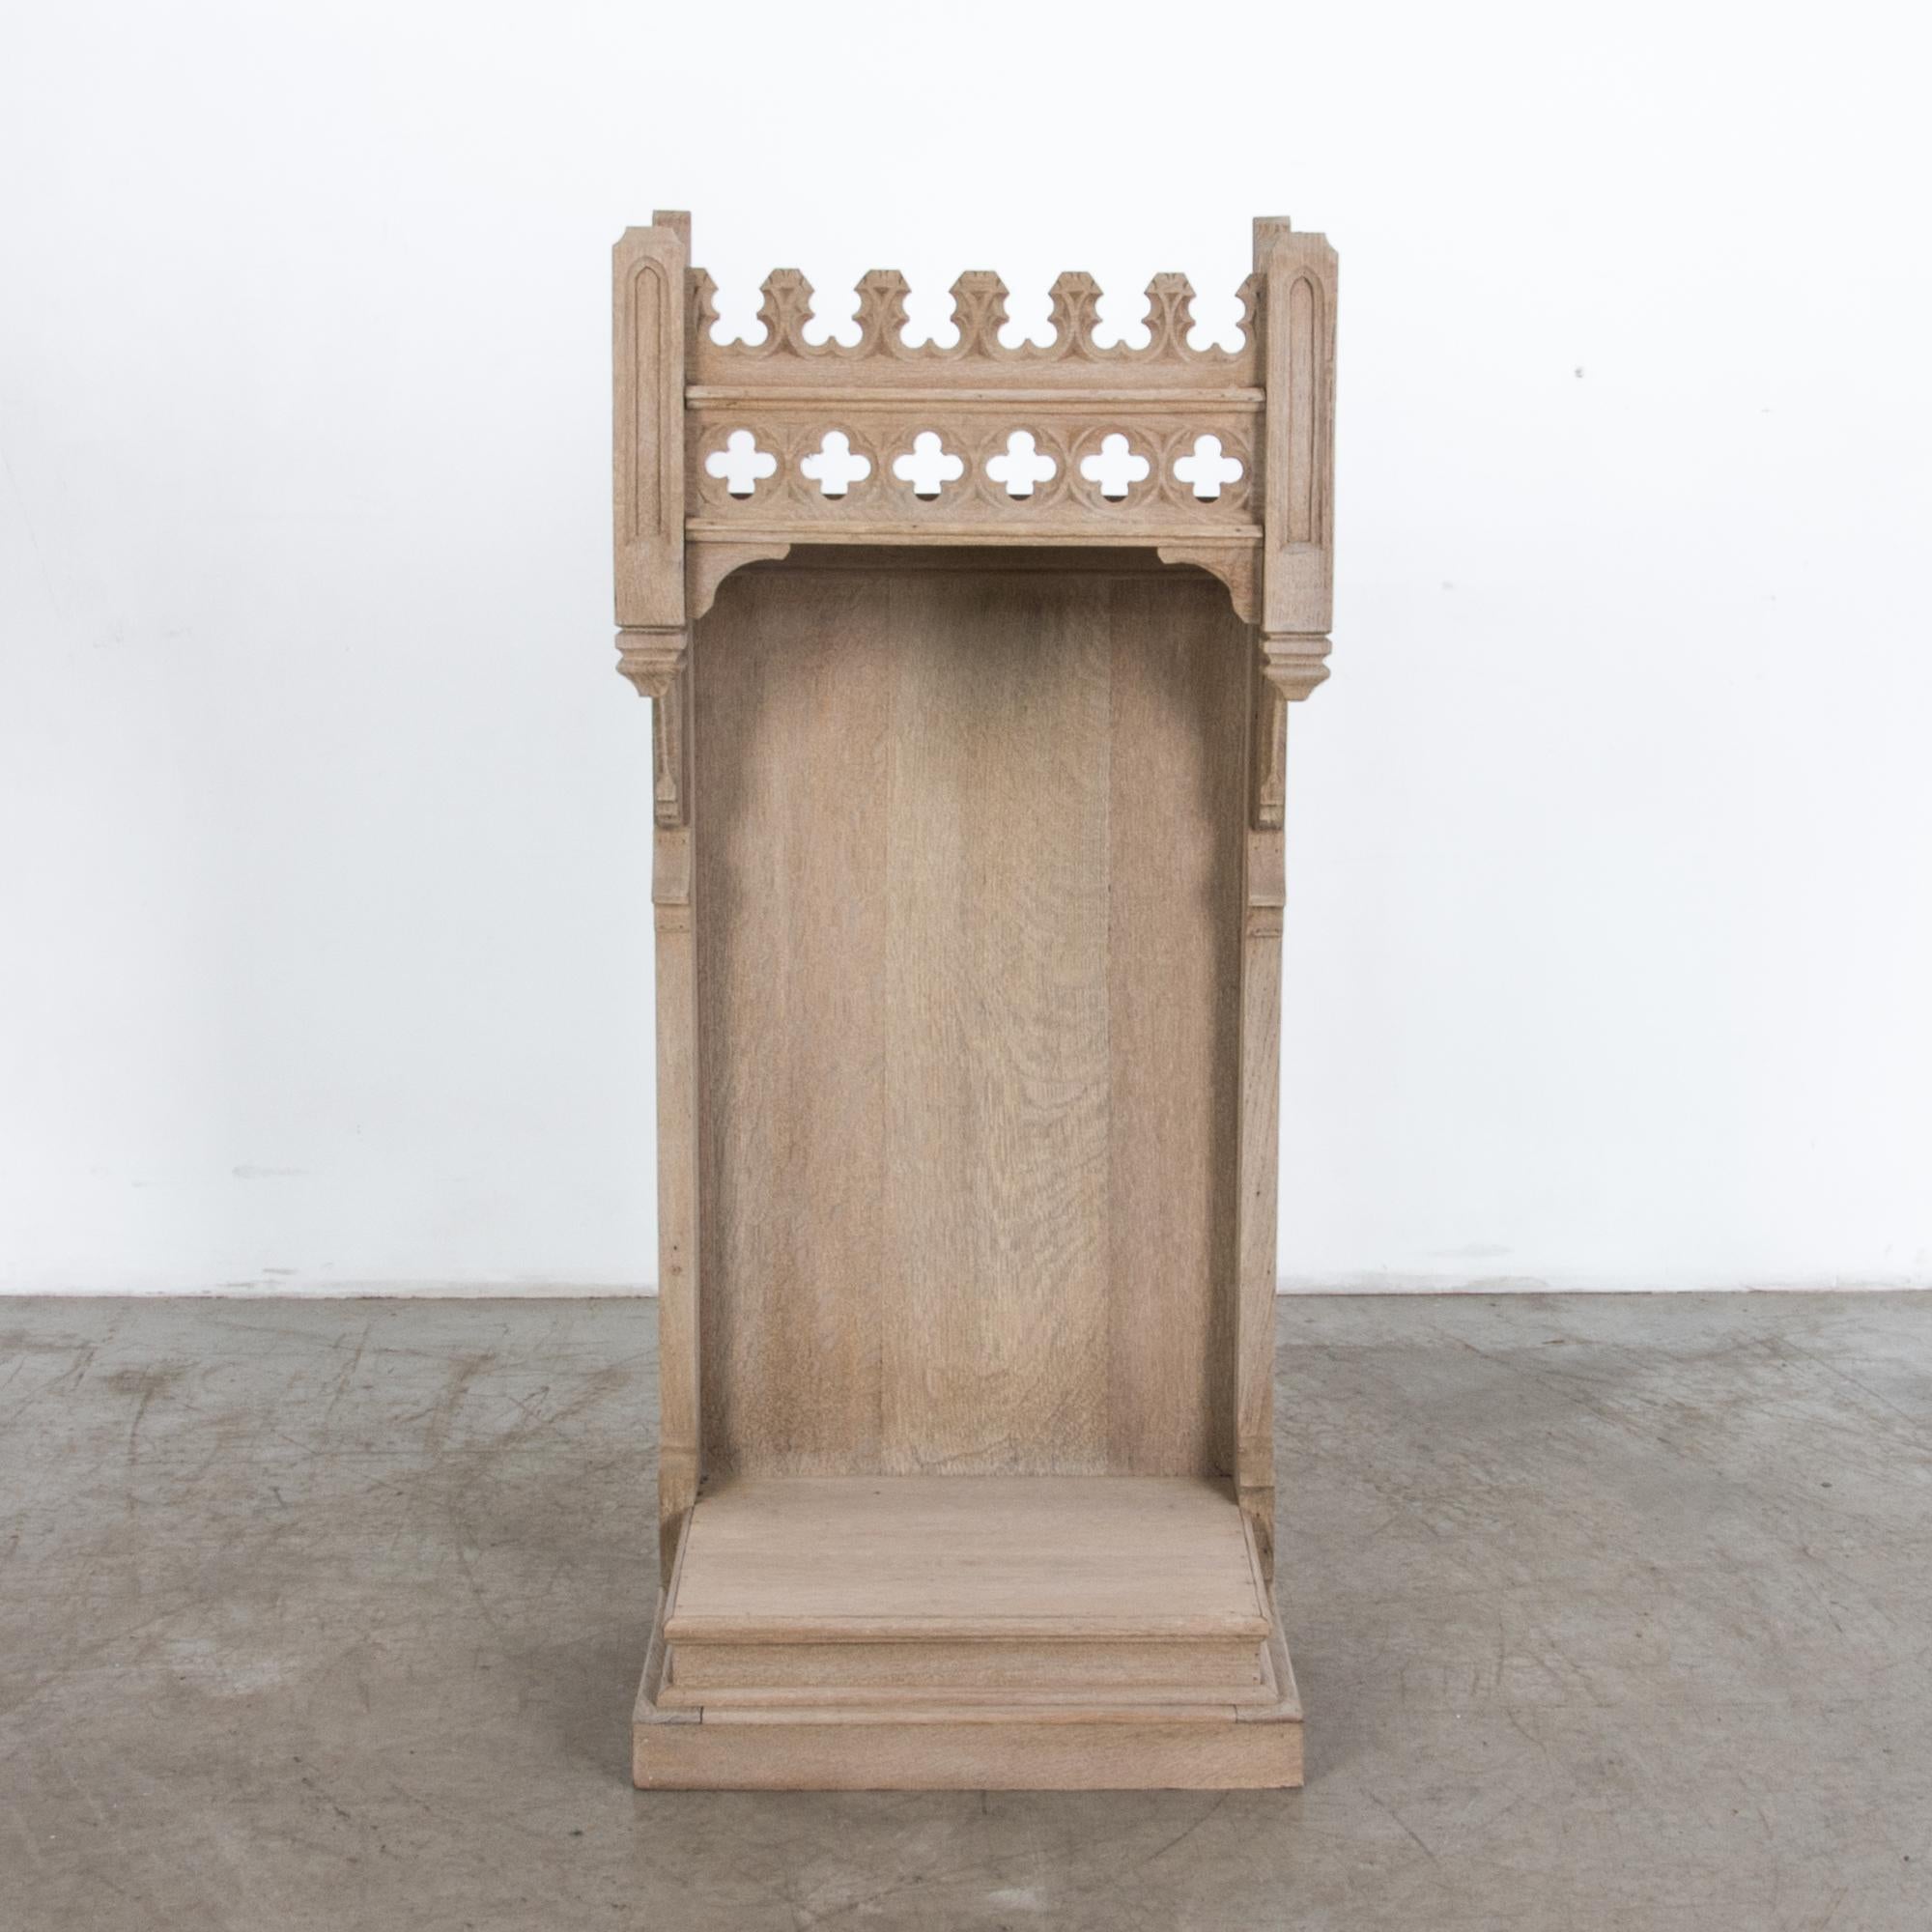 A Gothic style oak stand from circa 1900, France. Originally used for supporting a small statue, this intriguing piece has a multifaceted shape, with a lower niche topped with an enclosed shelf. Textured wood grain is complimented by carved